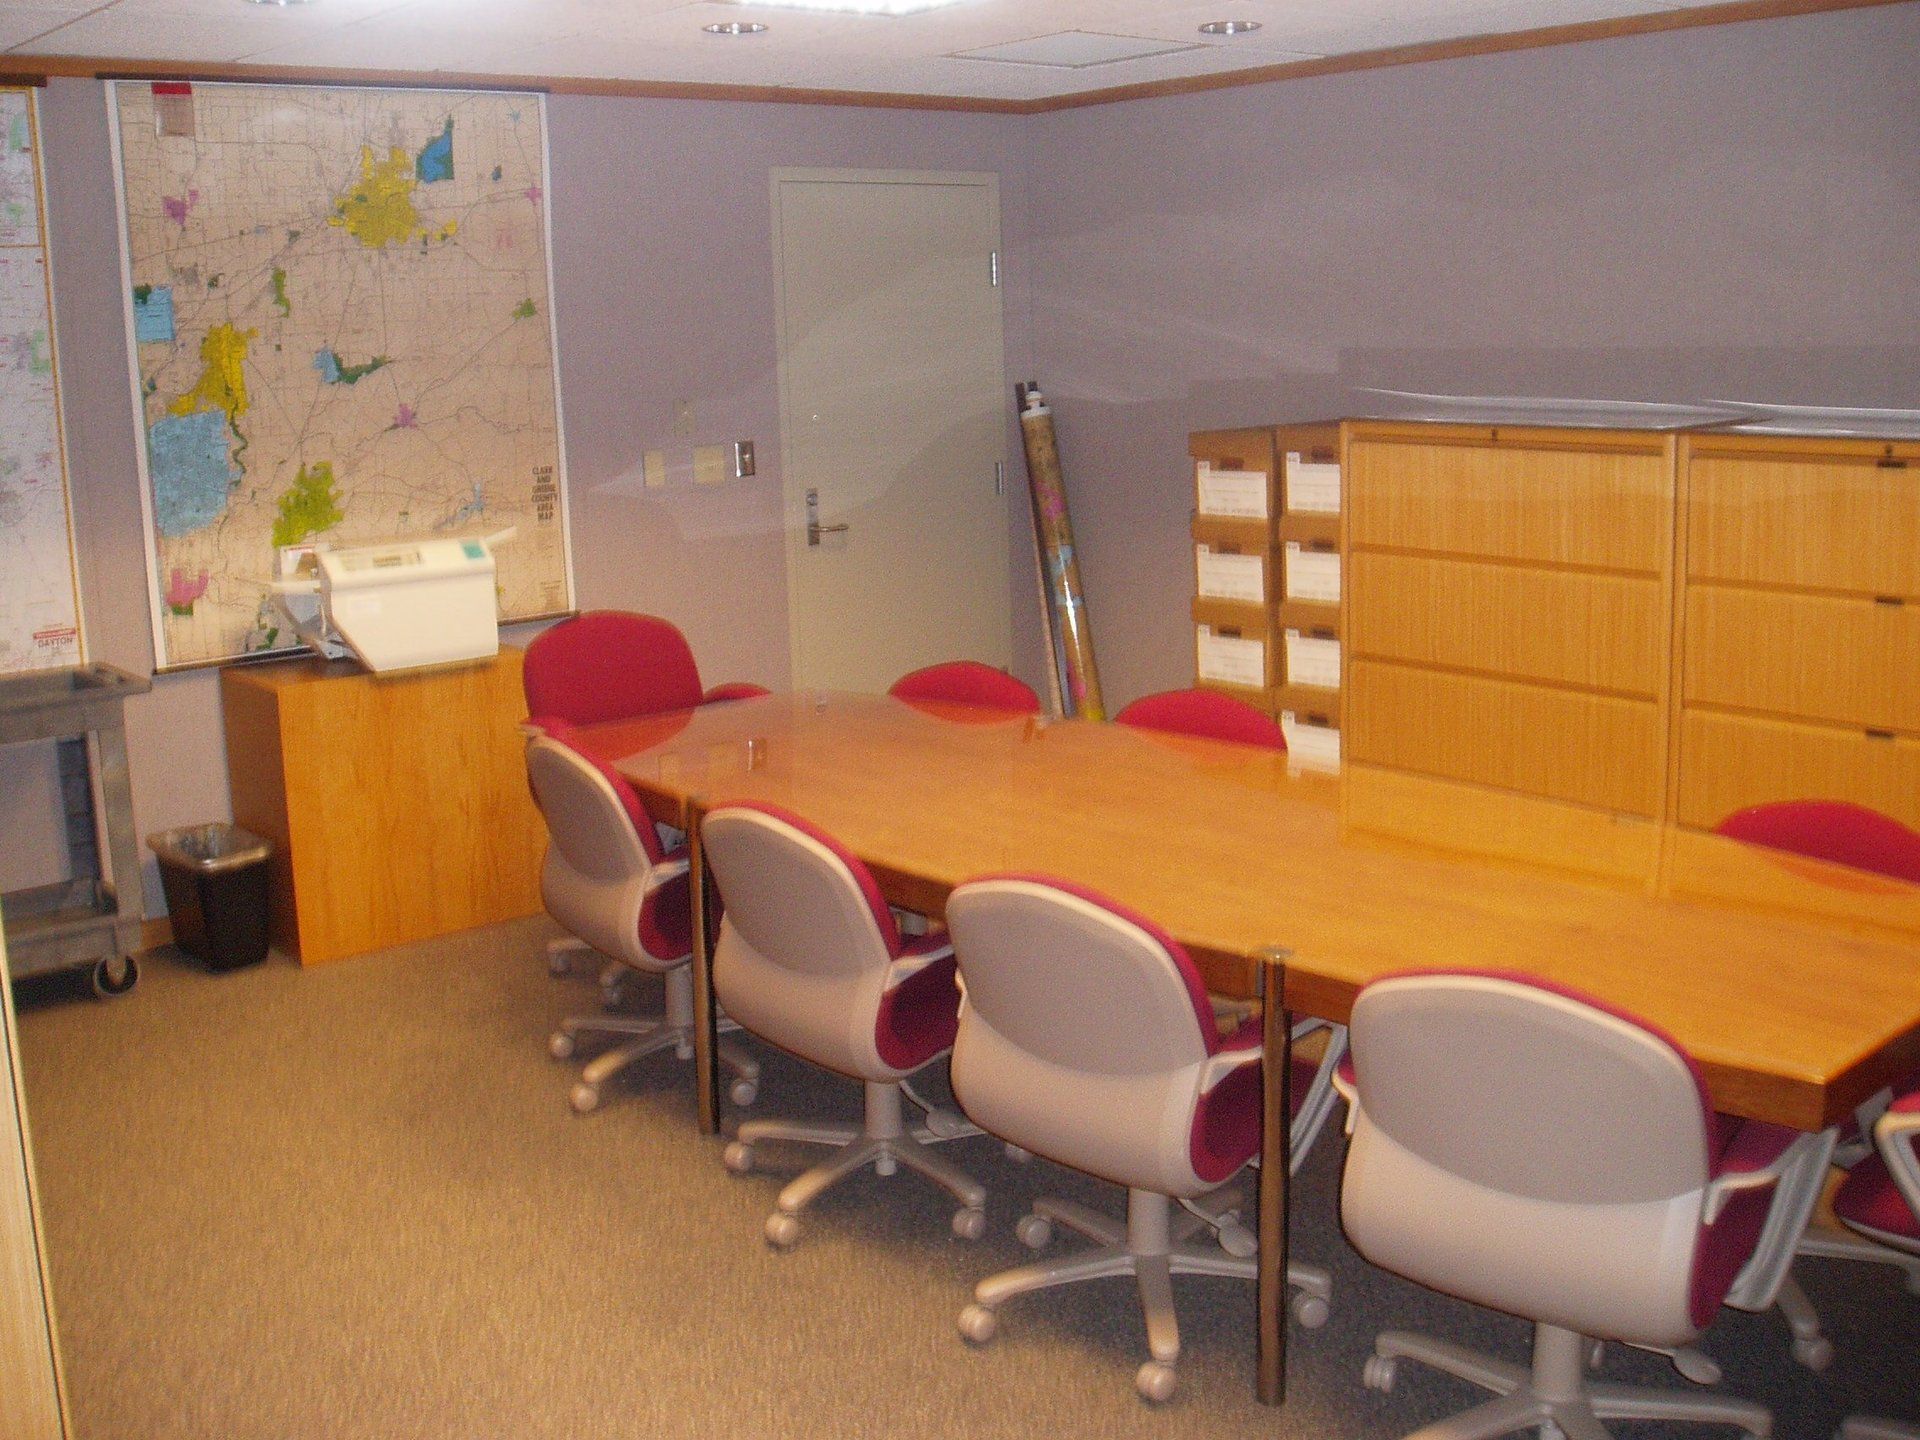 Sinclair Community College conference room